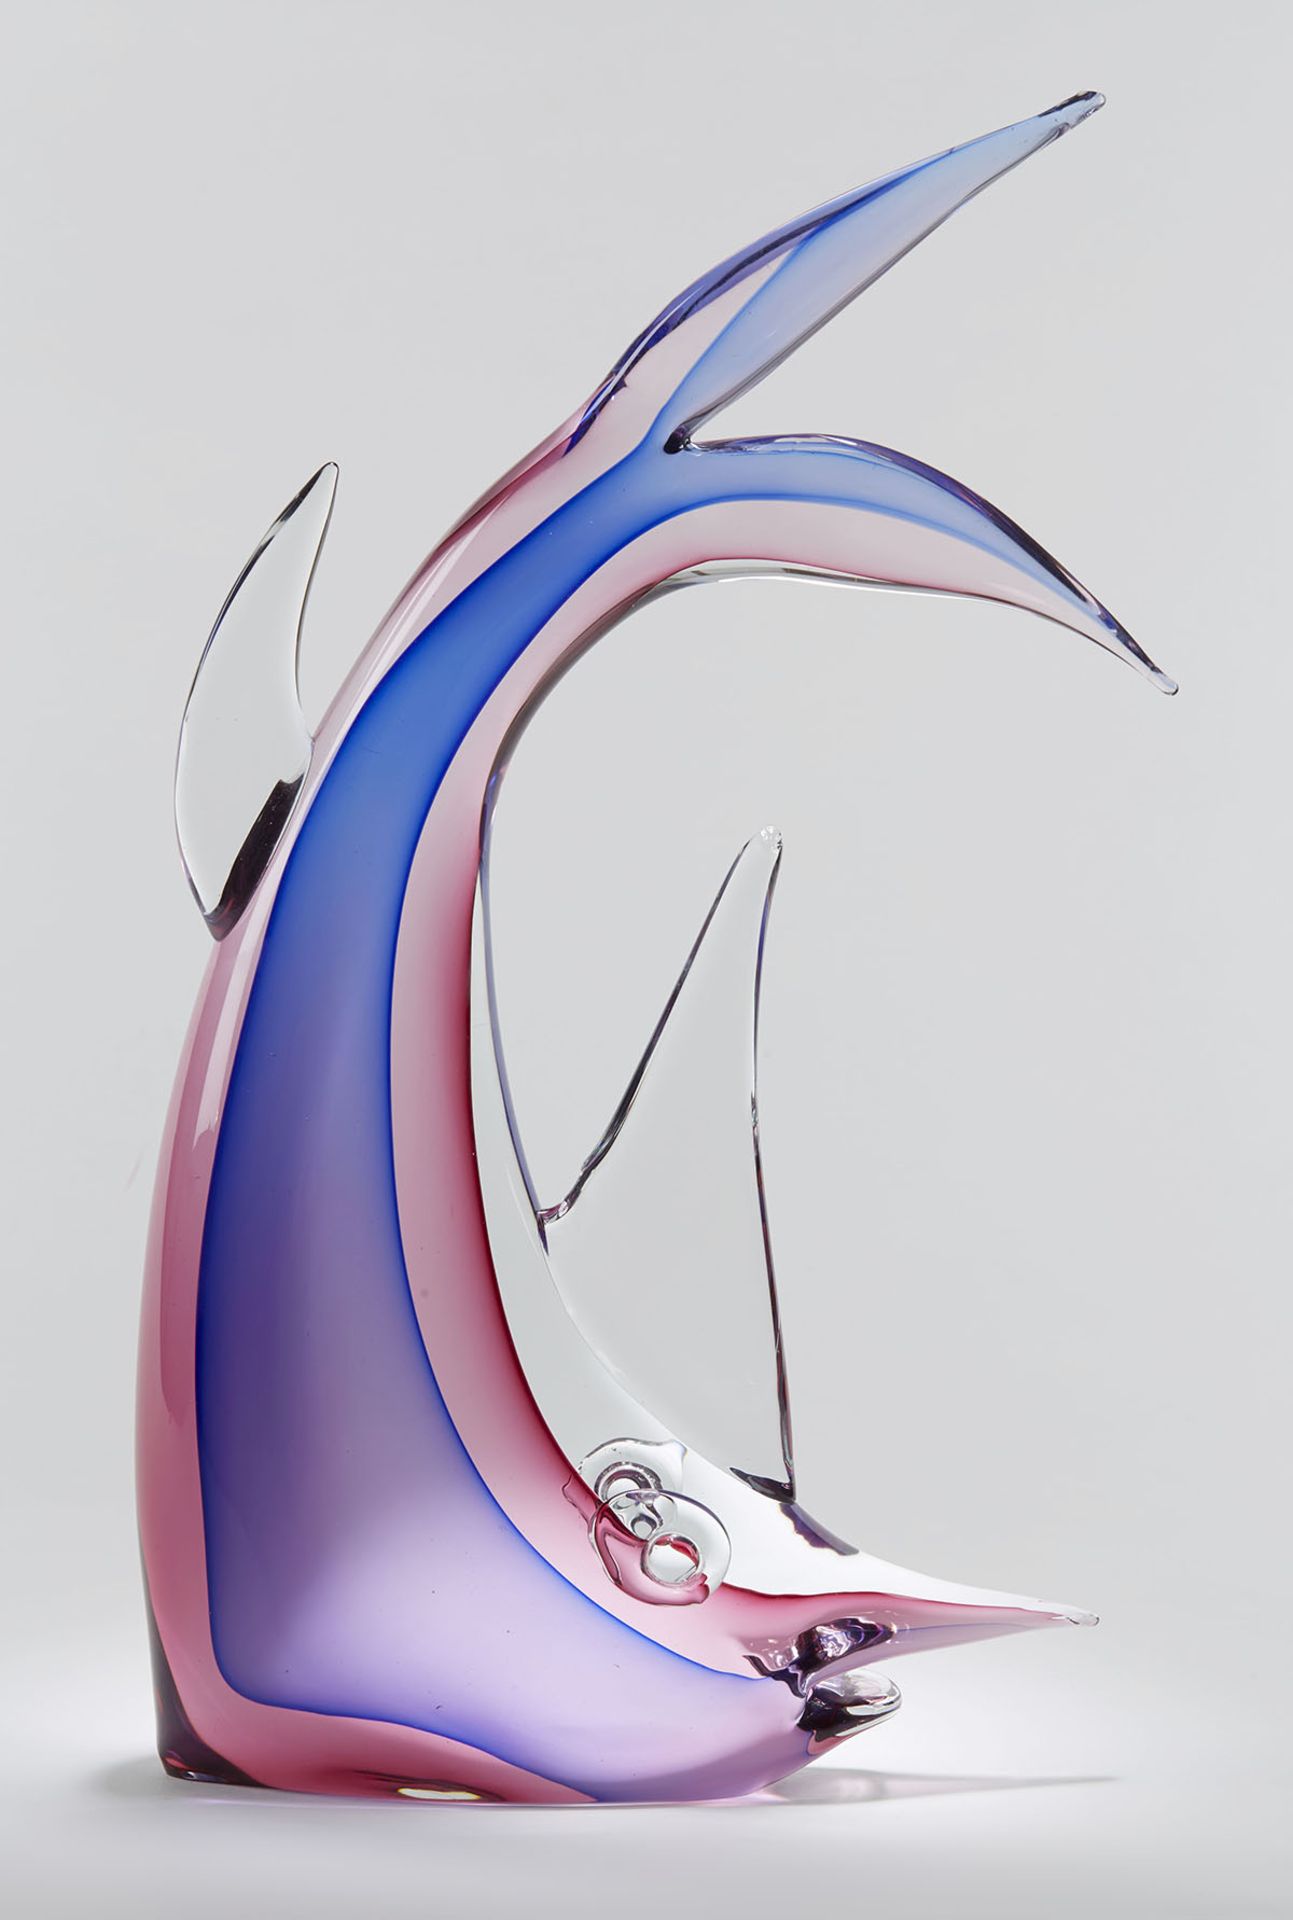 Italian Murano Sommerso Art Glass Leaping Marlin Fish Sculpture - Image 4 of 9